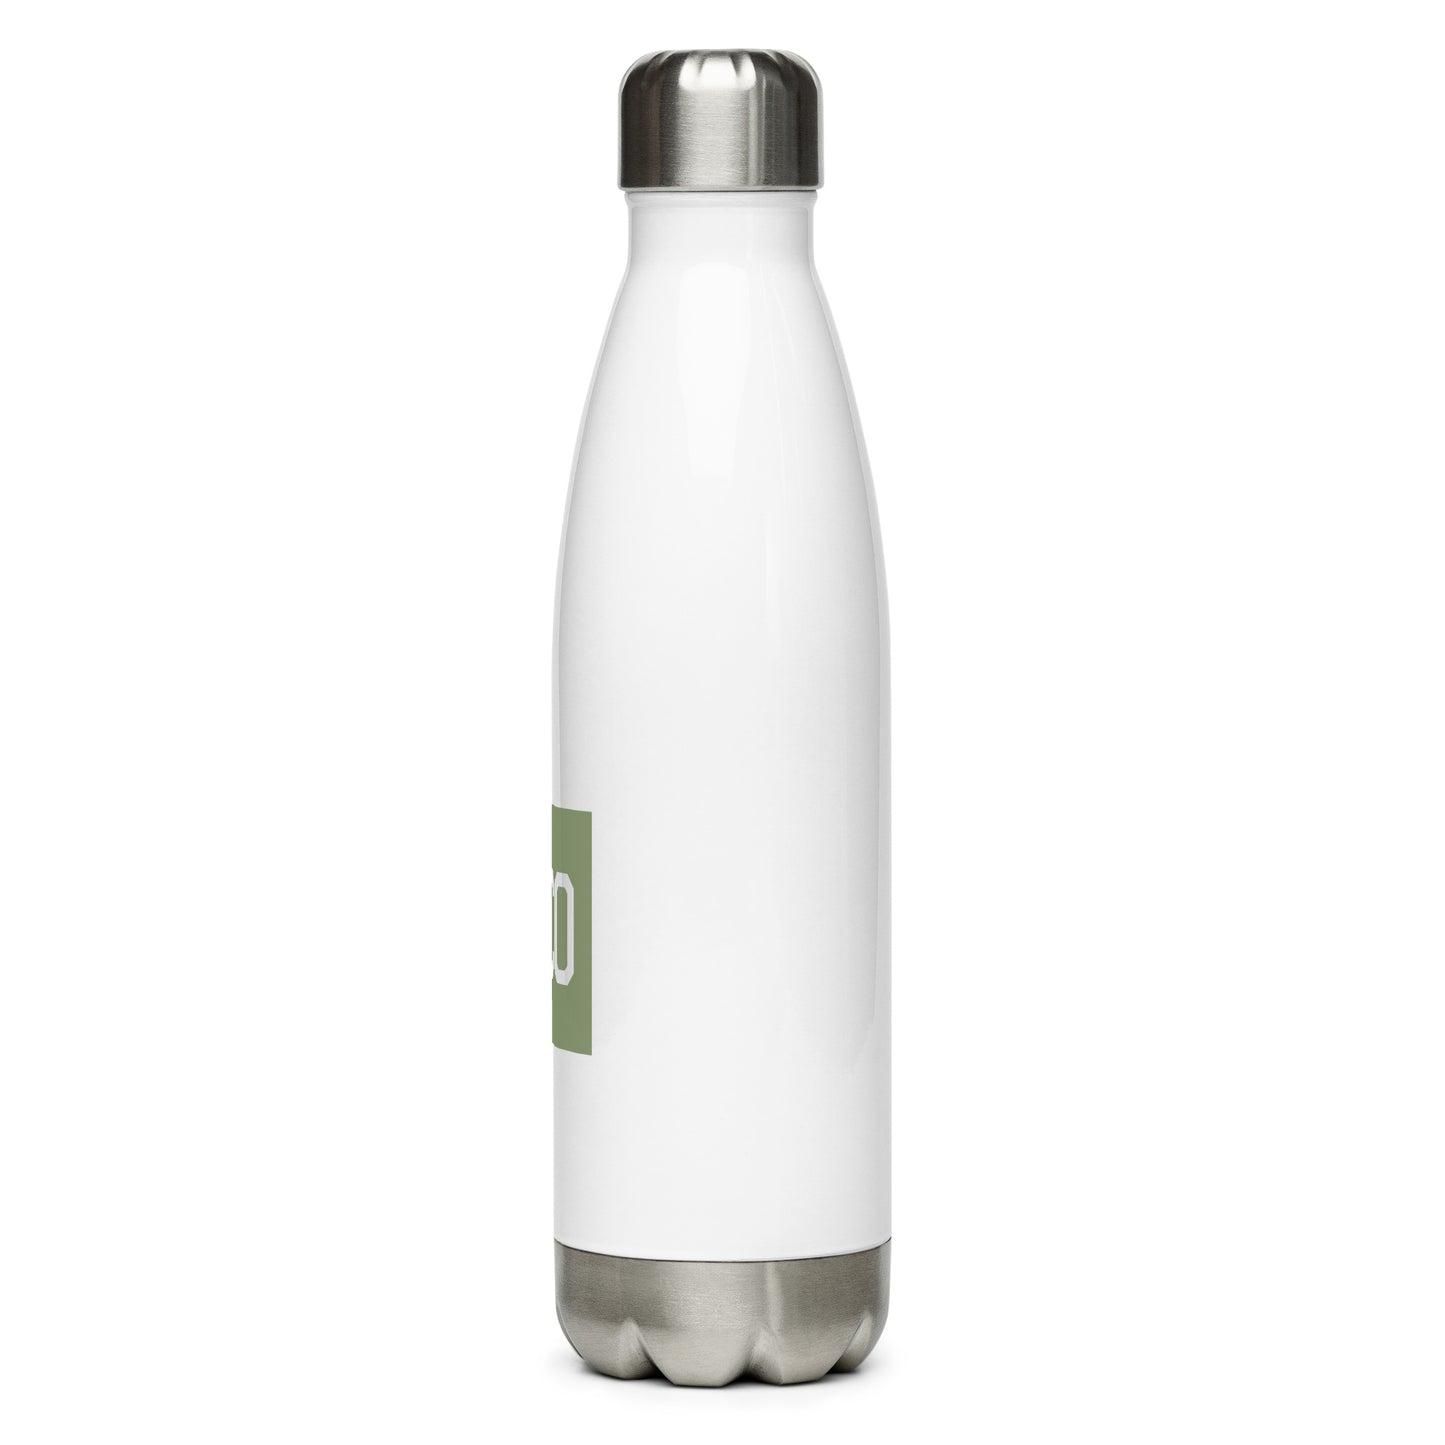 Aviation Gift Water Bottle - Camo Green • FCO Rome • YHM Designs - Image 08